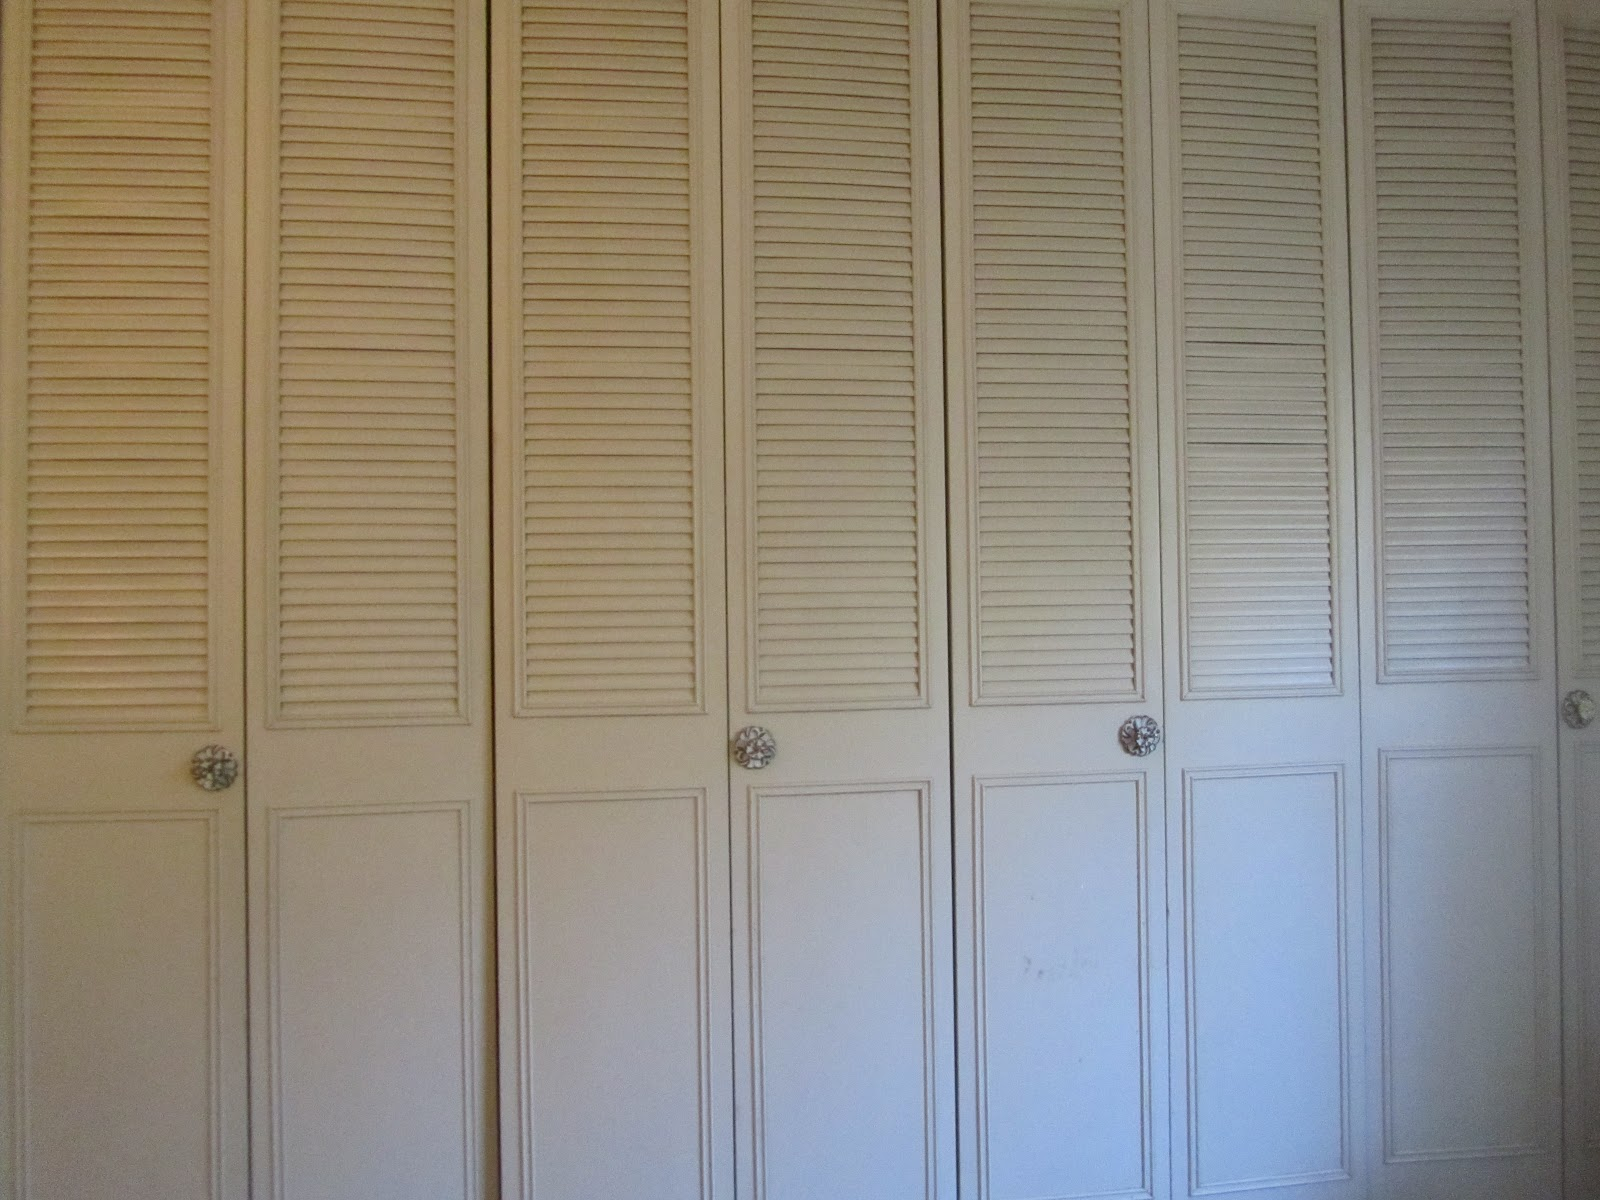 Bed Bath Wonderful Bifold Closet Doors Design With Door Knobs For within proportions 1600 X 1200